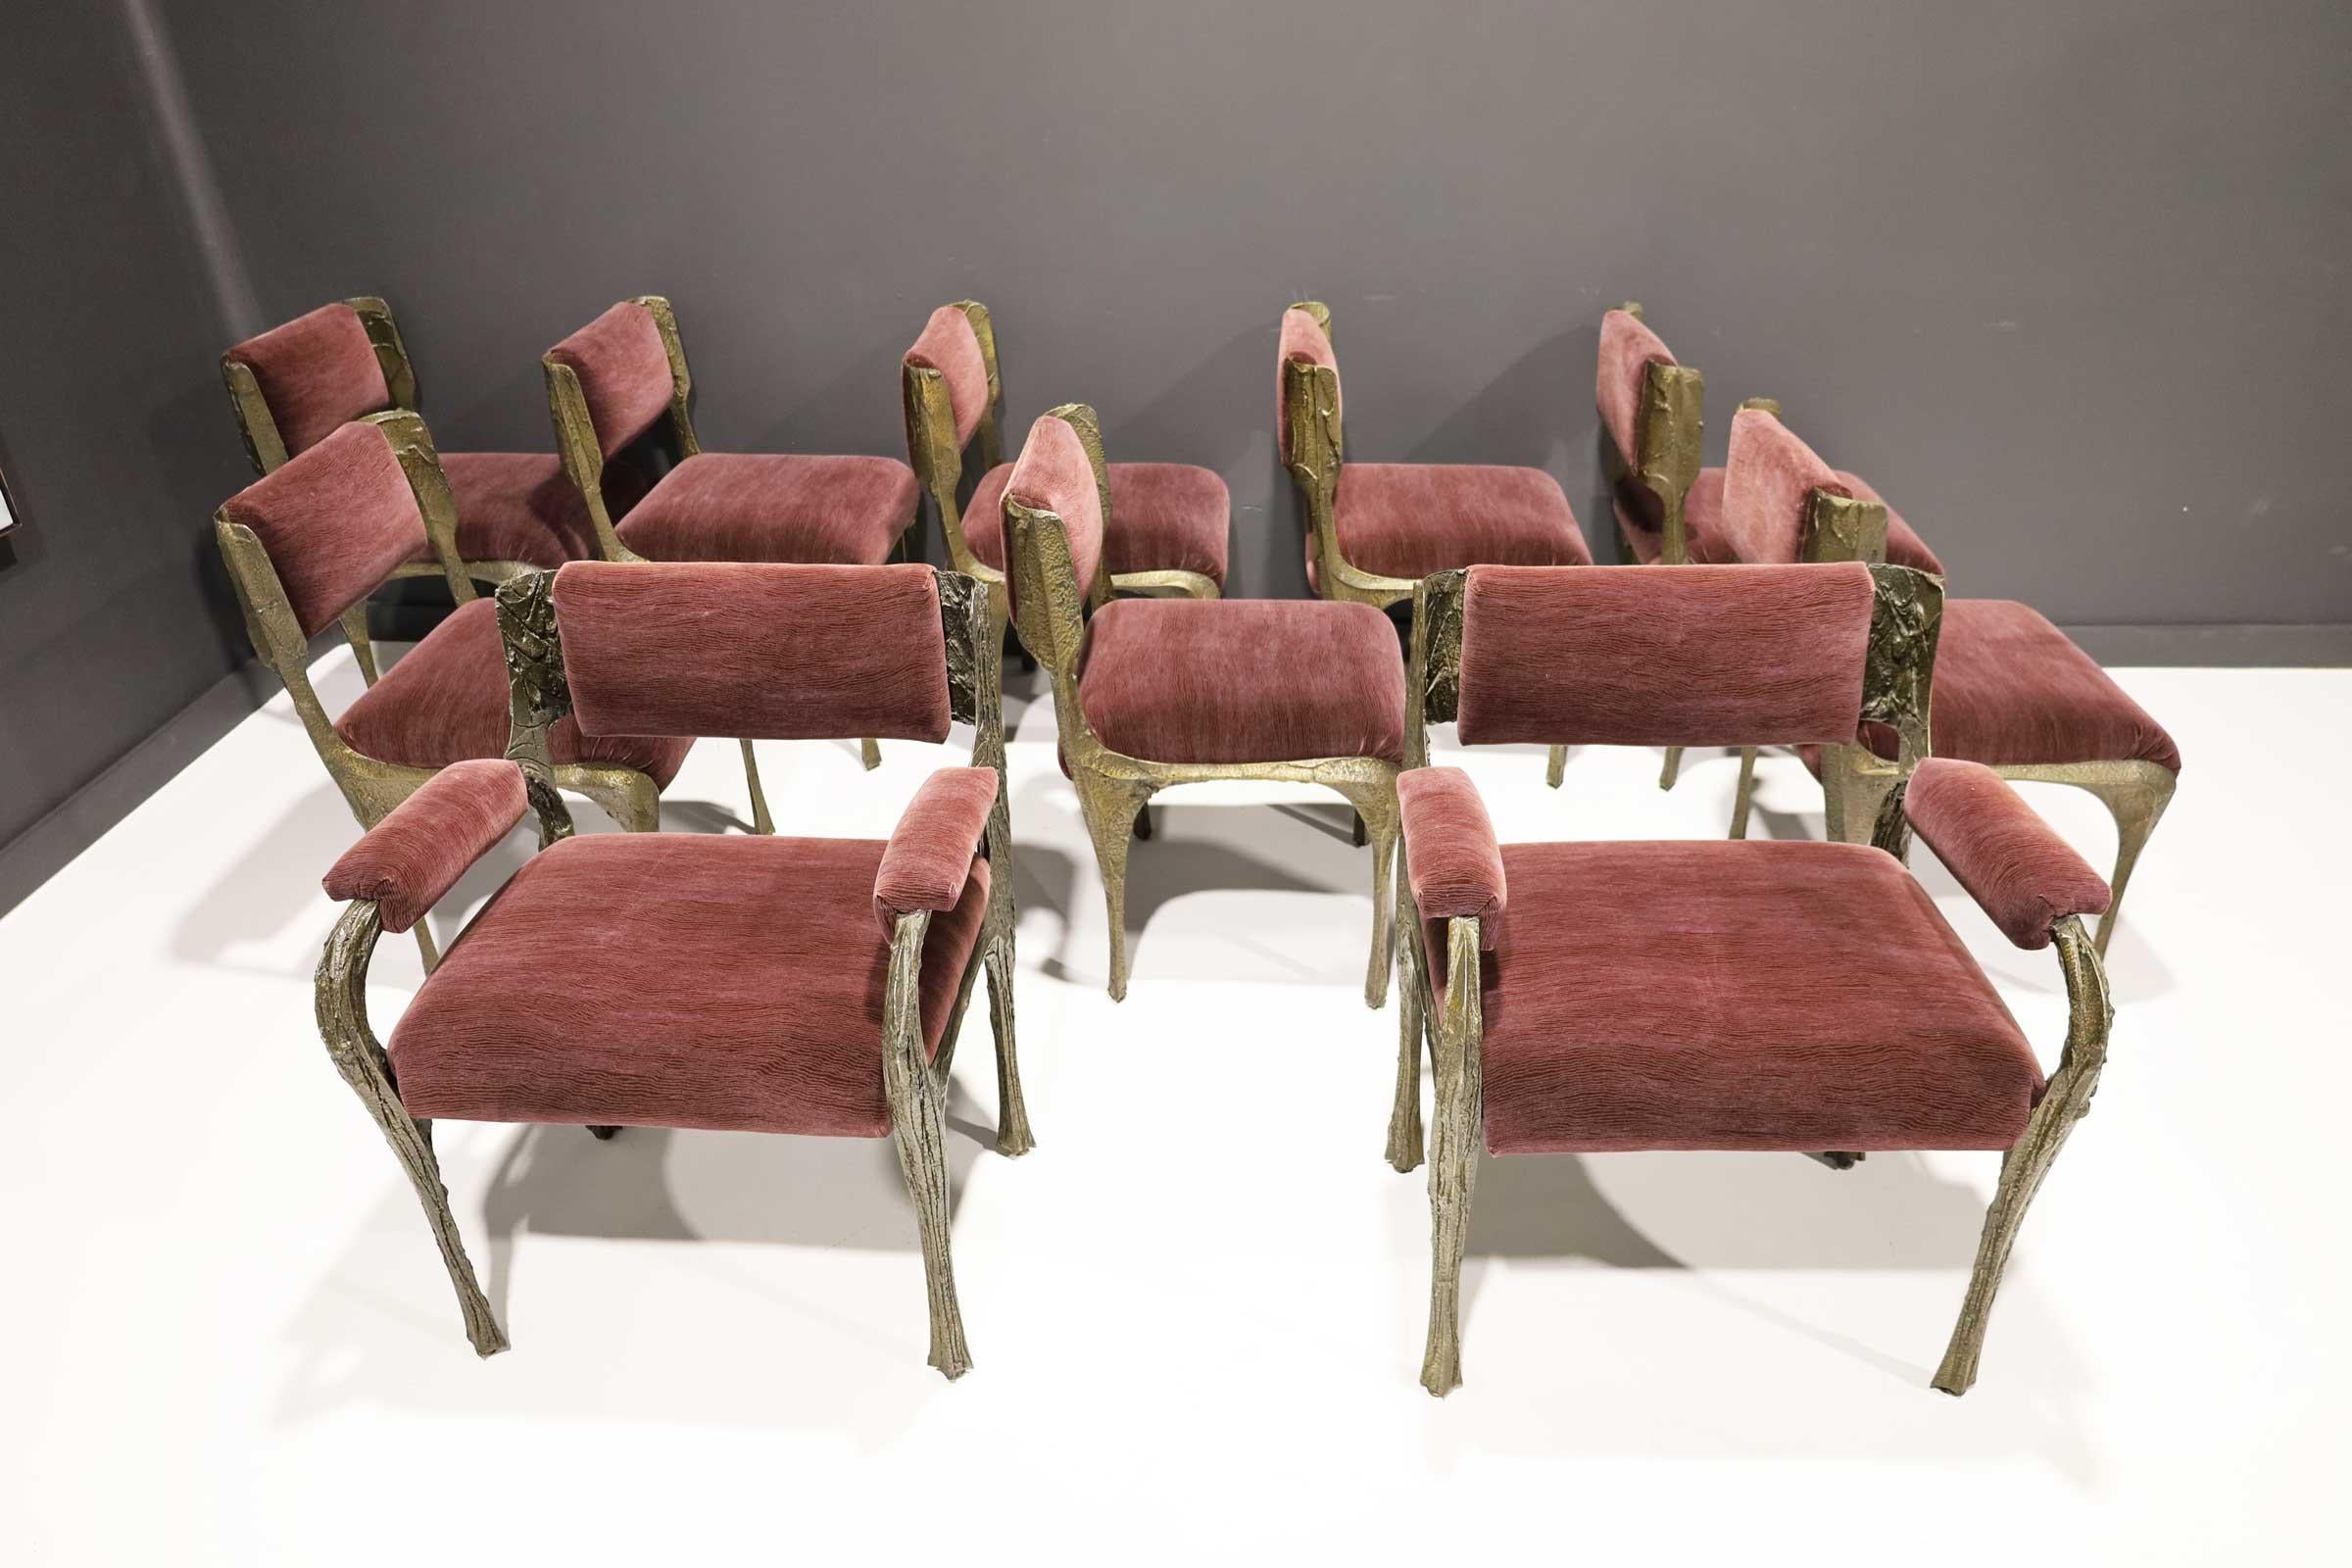 20th Century Paul Evans Set of Ten Sculpted Bronze Dining Chairs in Aubergine Upholstery